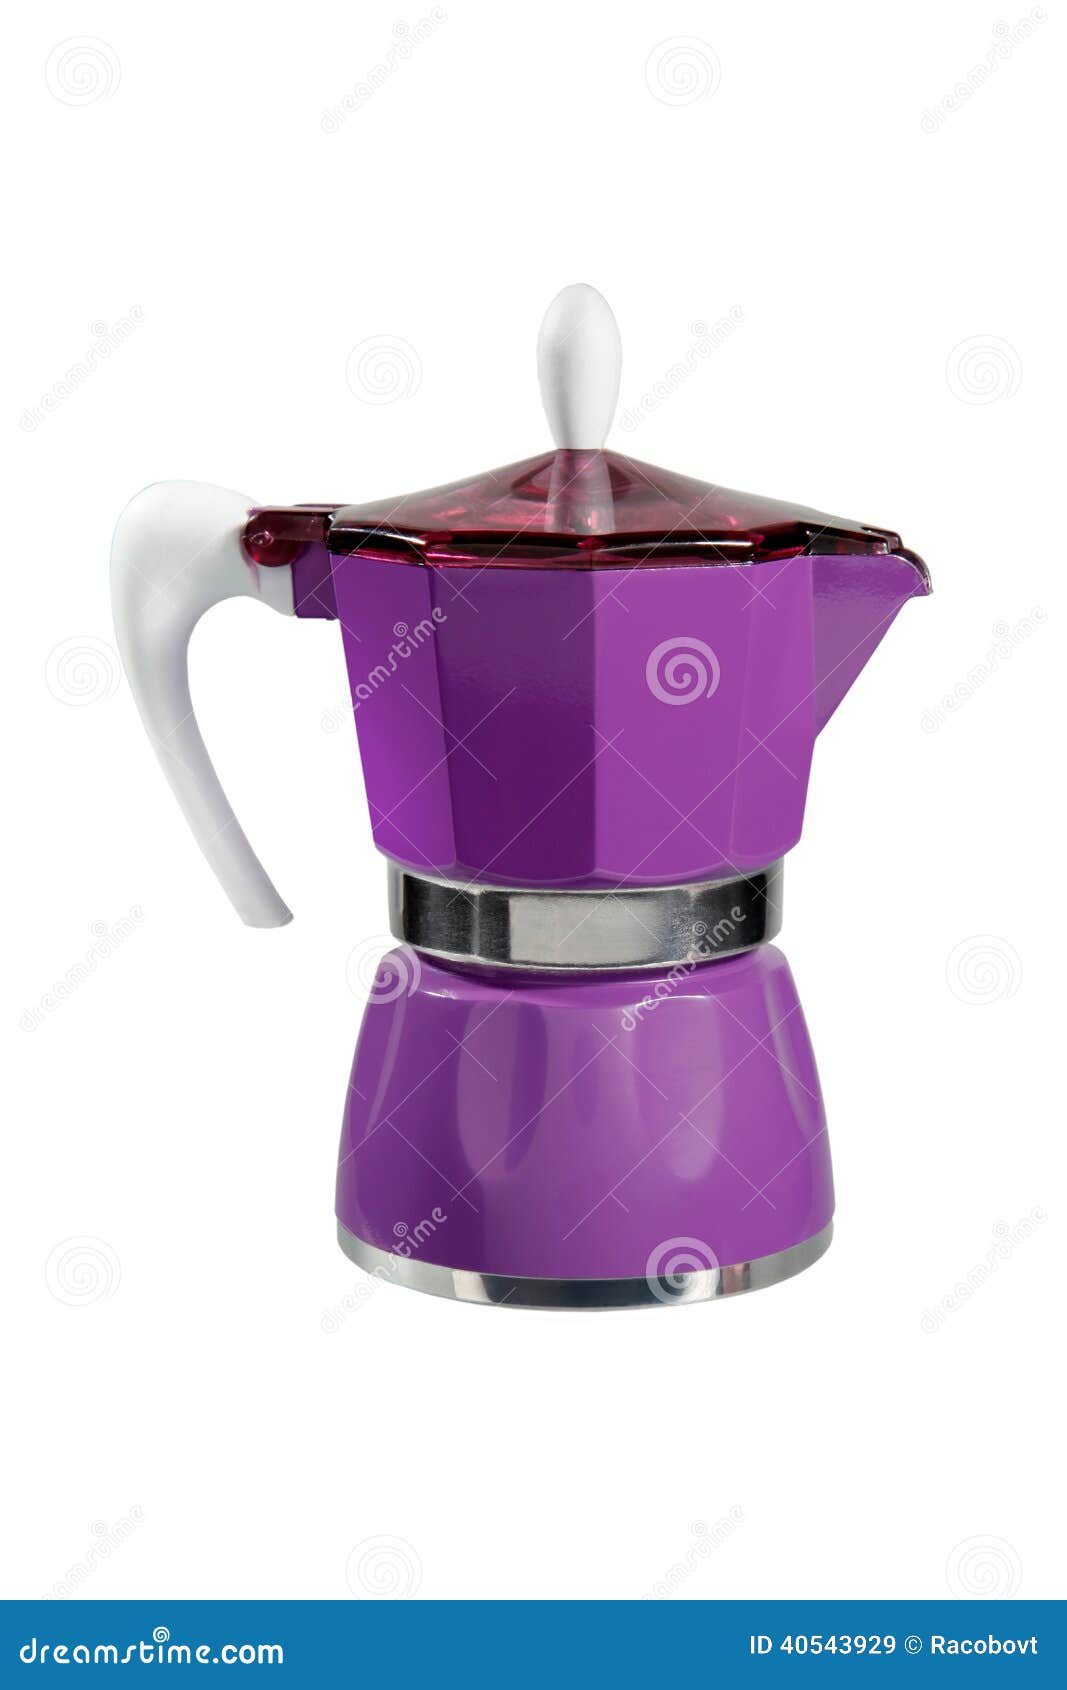 Purple coffee maker stock image. Image of white, cafe - 40543929